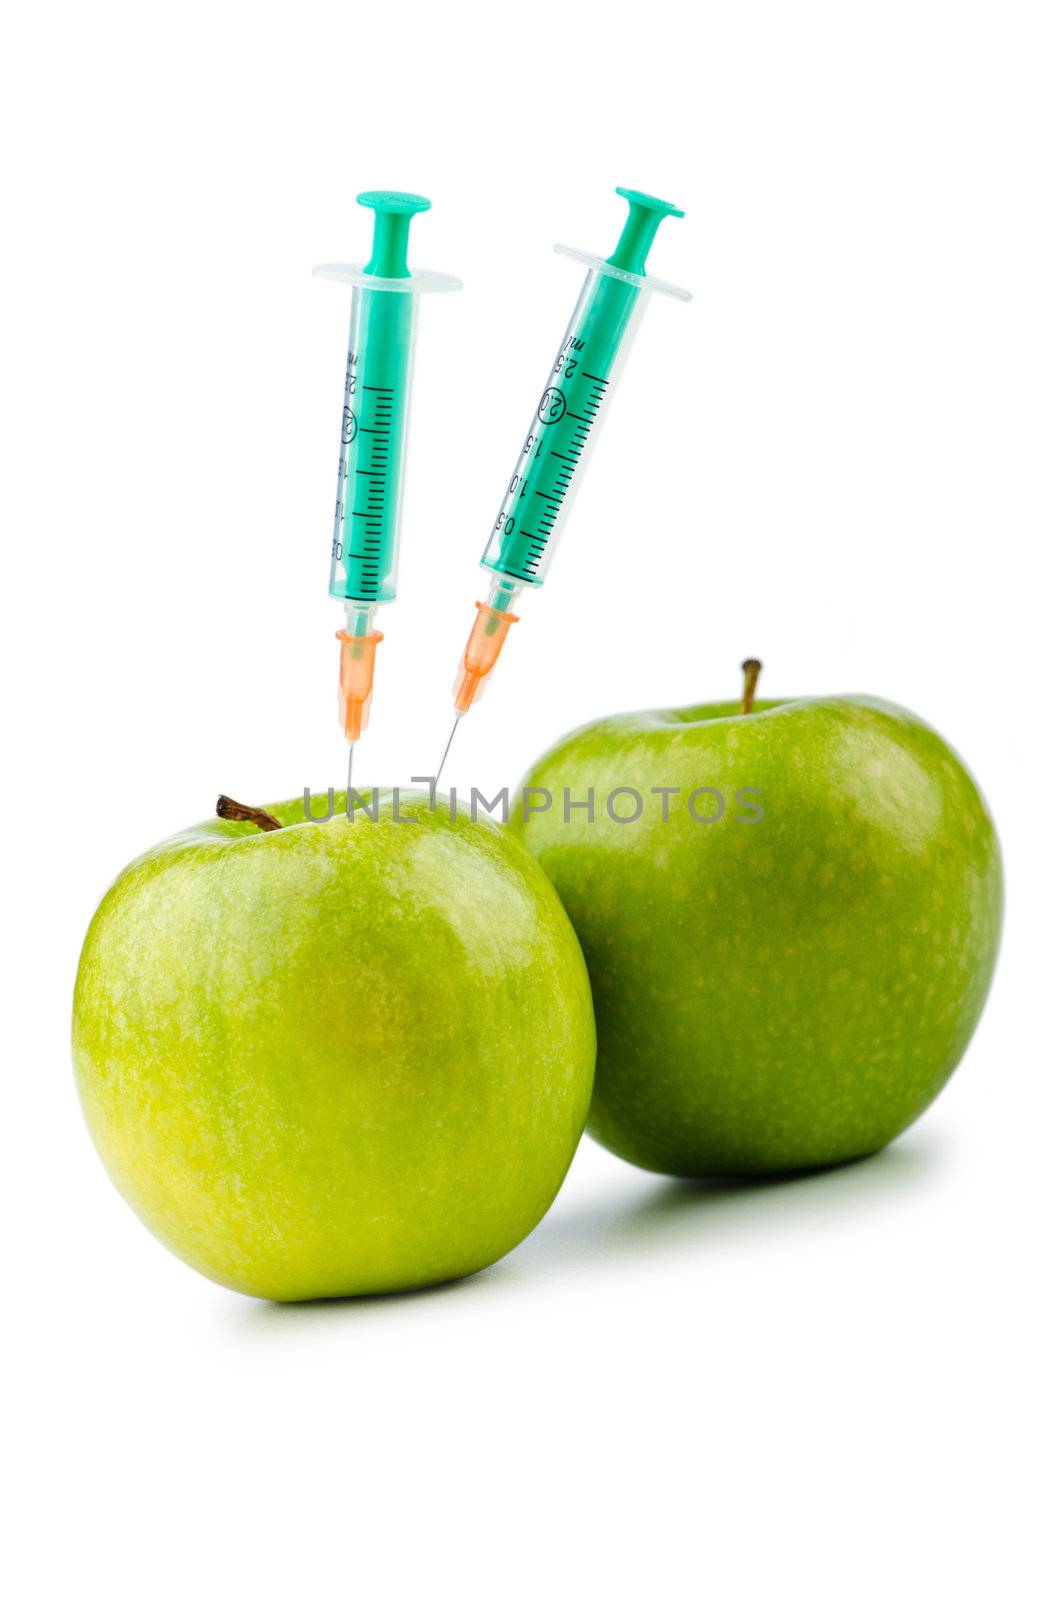 Experiment with apple and syringes by Elnur